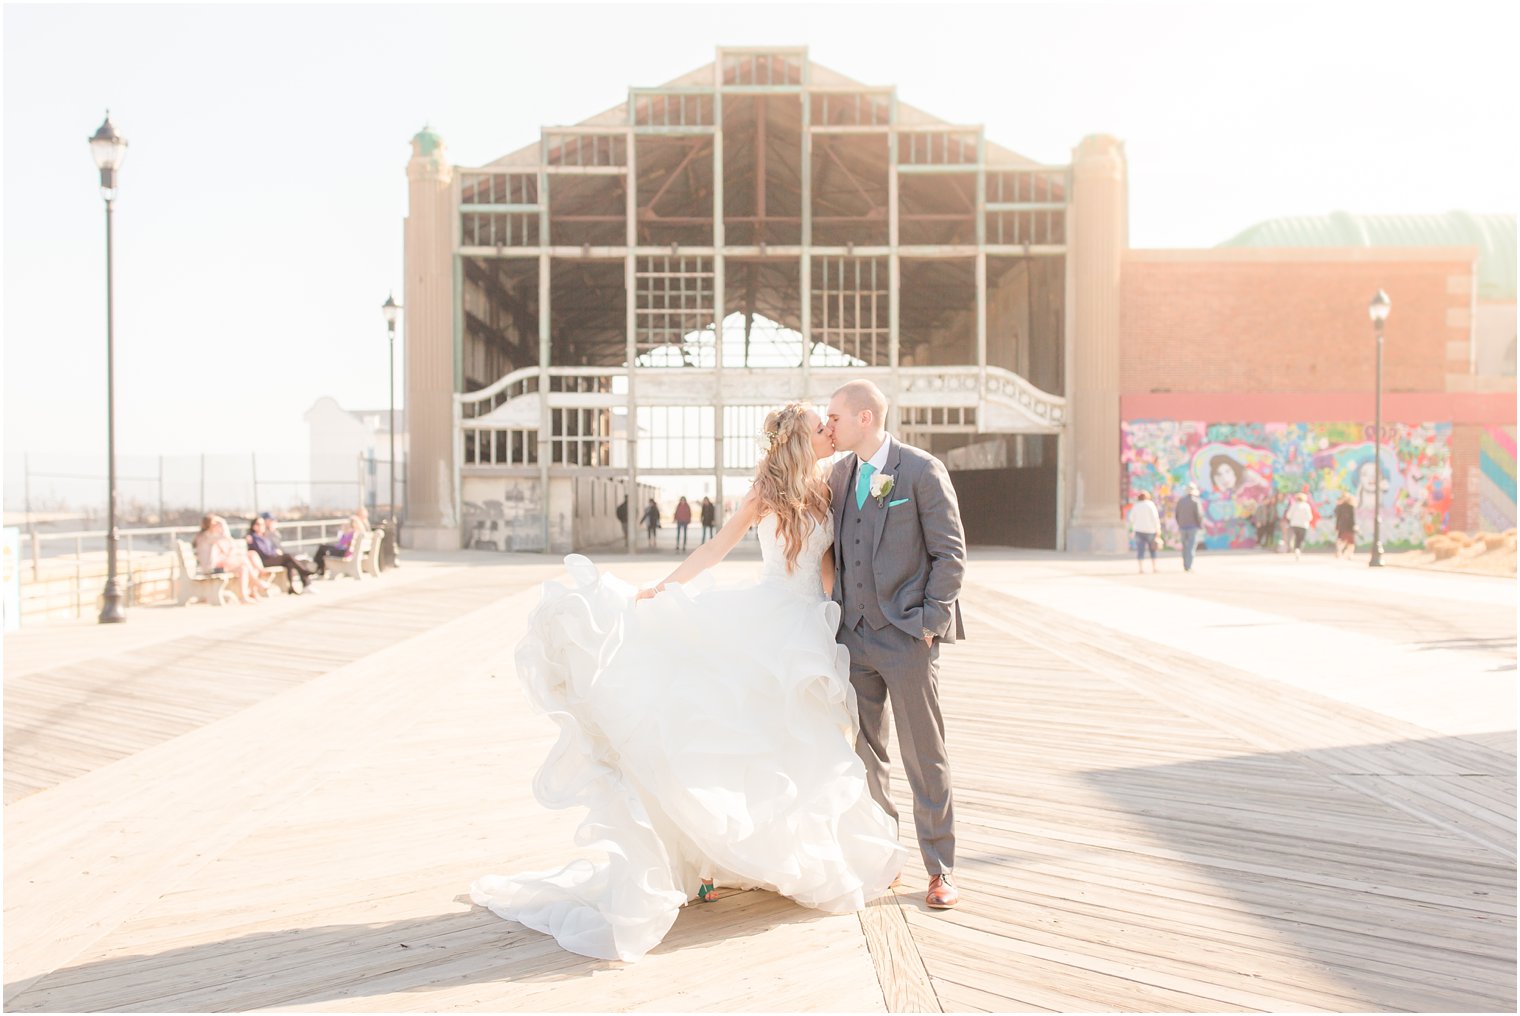 Bride and groom kissing on the boardwalk in Asbury Park